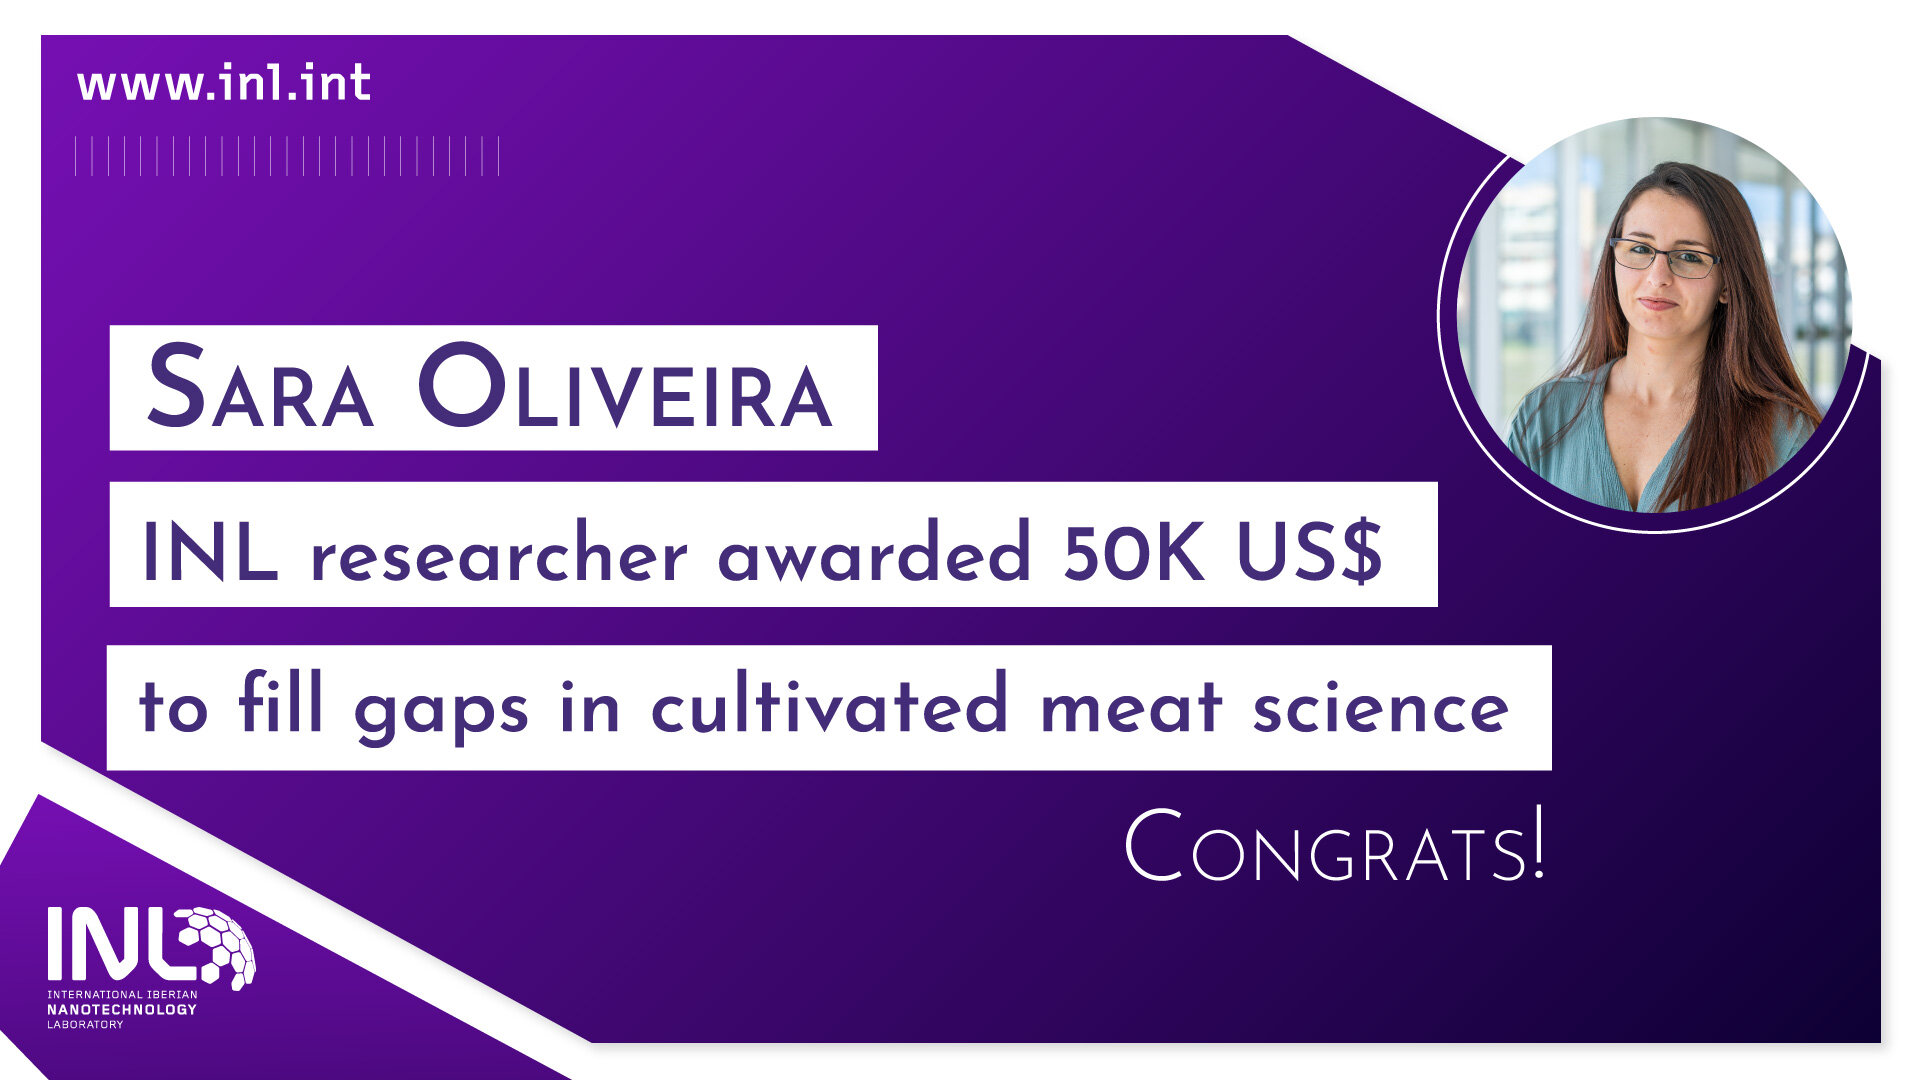 INL researcher awarded 50K US$ to fill gaps in cultivated meat science